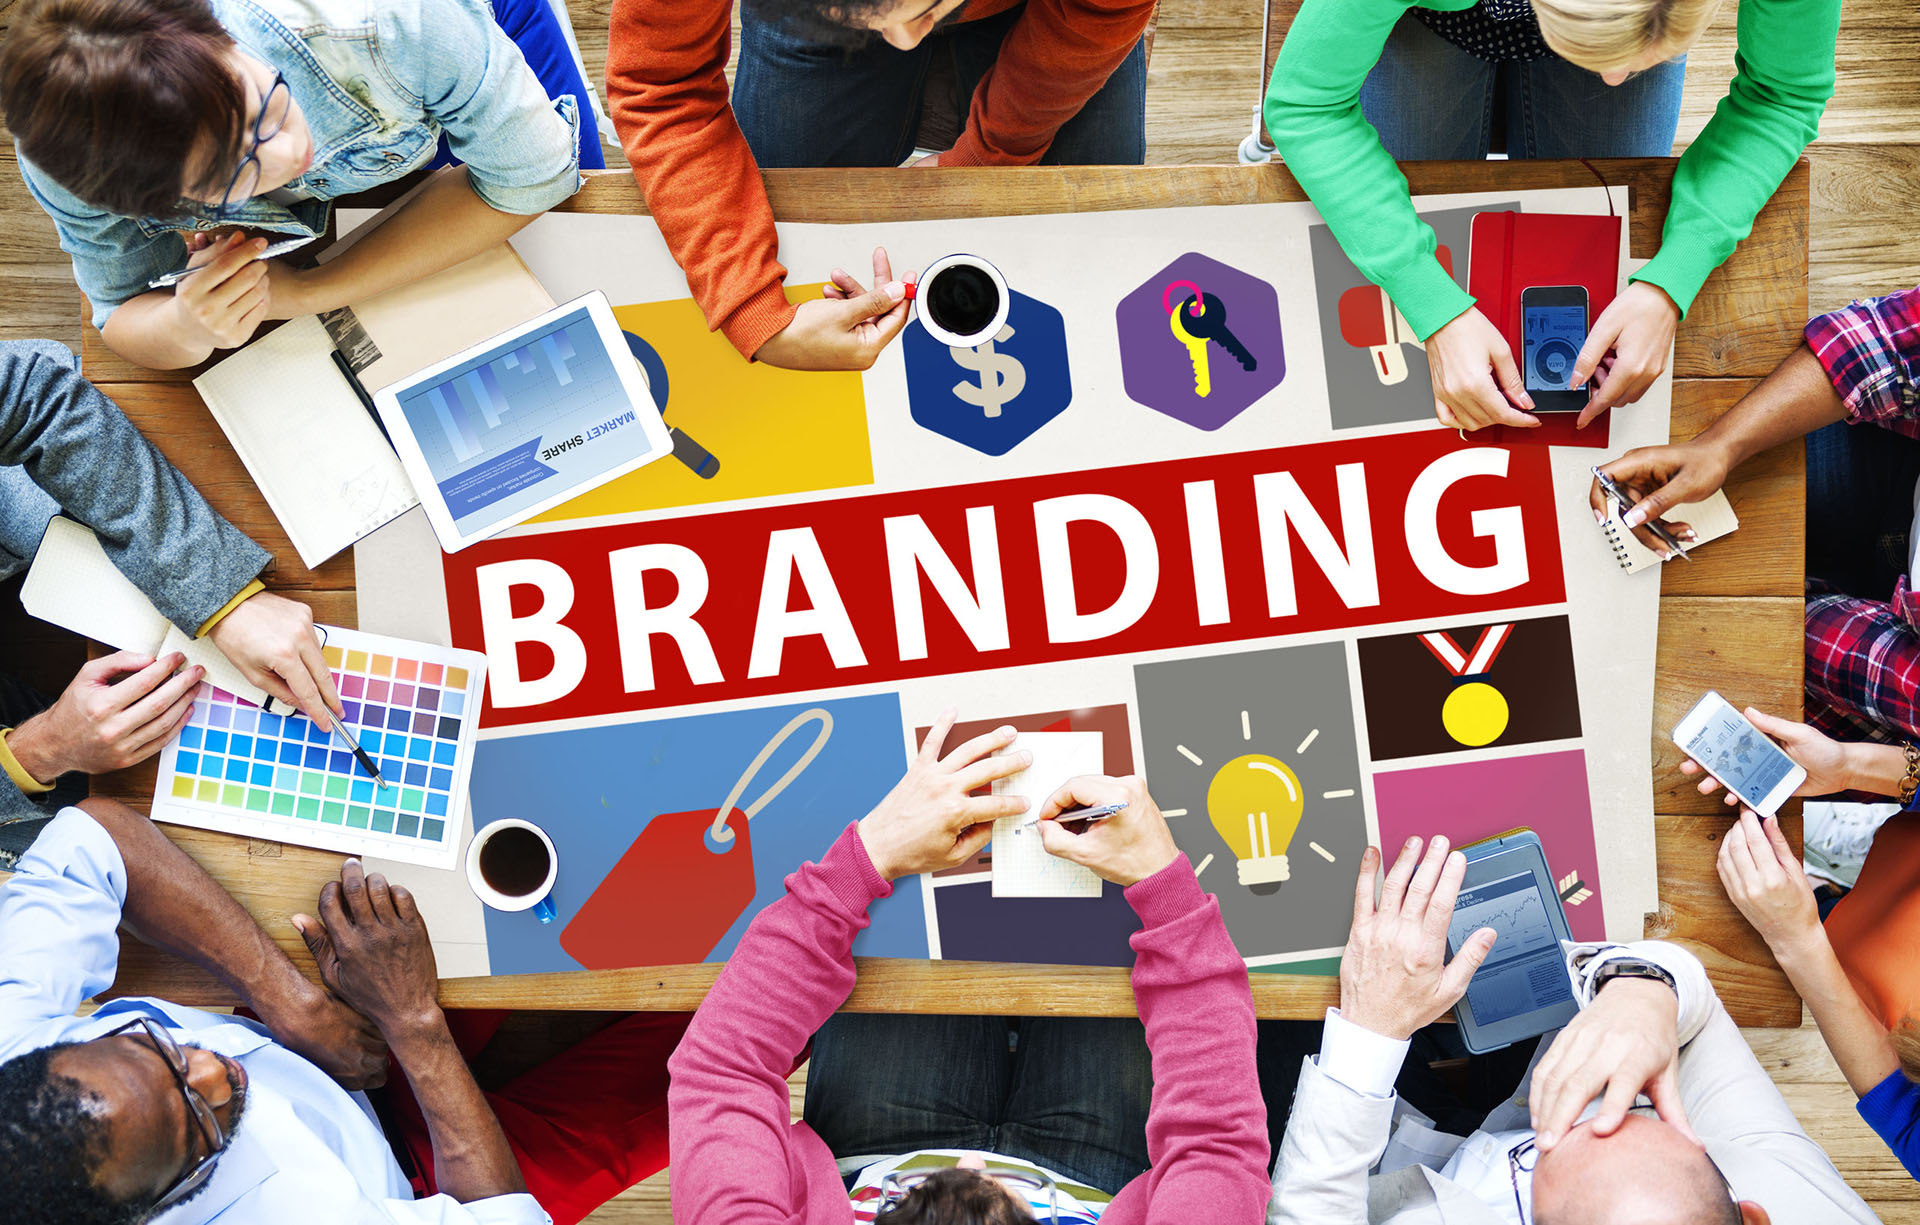 Branding and rebranding: Creating a unique image of the company through the development of corporate identity, logo and slogans